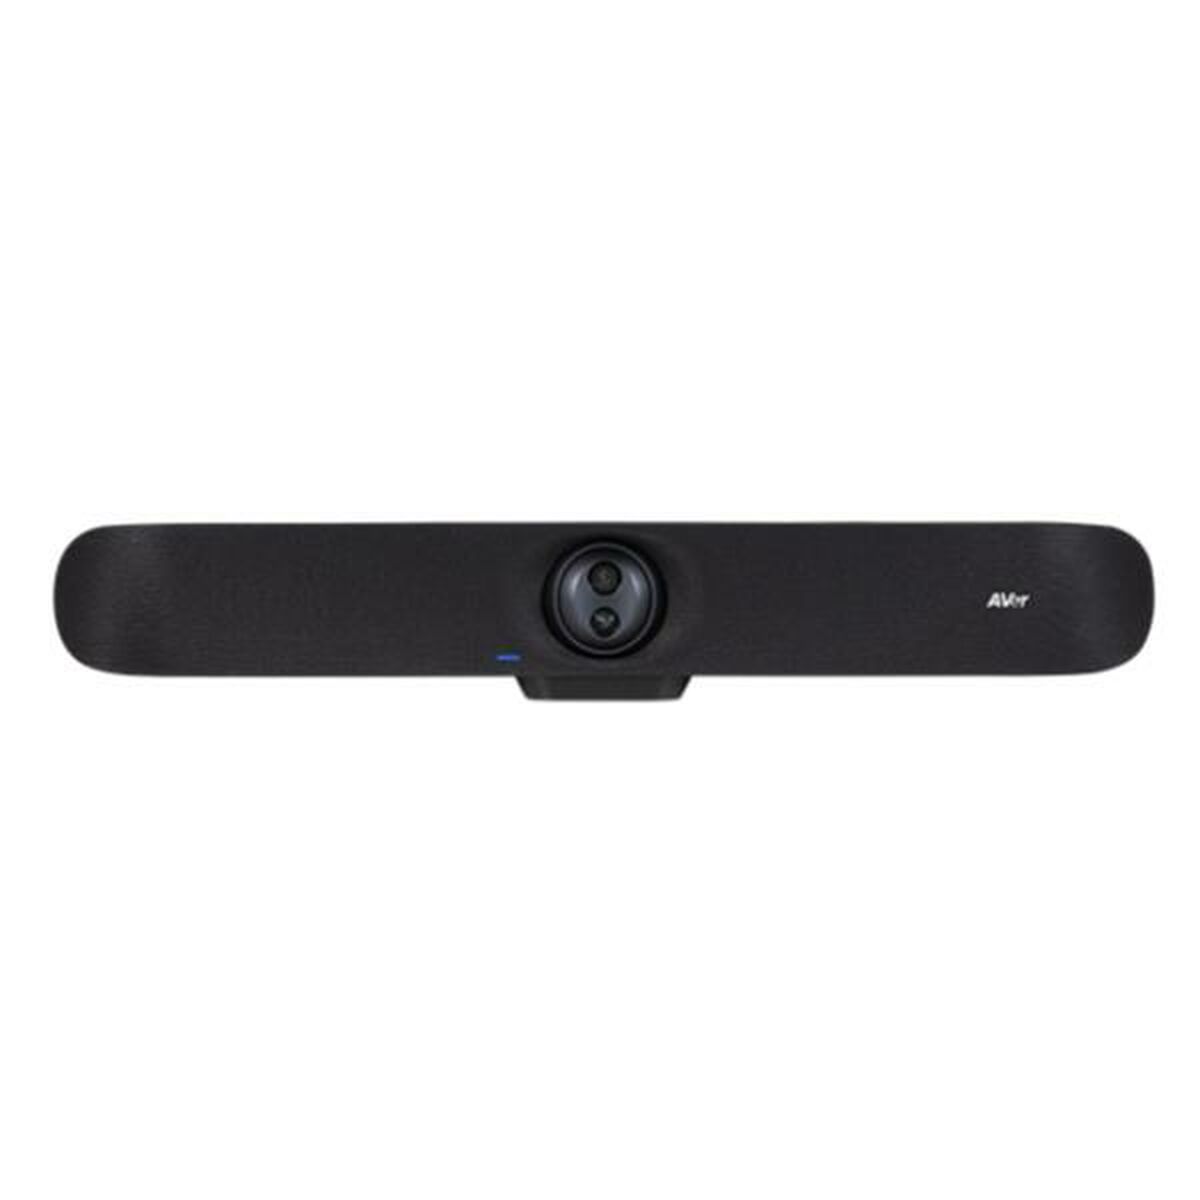 Soundbar AVer VB350 Pro Black, AVer, Electronics, Audio and Hi-Fi equipment, soundbar-aver-vb350-pro-black, :Ultra HD, Brand_AVer, category-reference-2609, category-reference-2882, category-reference-2925, category-reference-t-19653, category-reference-t-7441, category-reference-t-7442, cinema and television, Condition_NEW, entertainment, music, Price_+ 1000, Teleworking, RiotNook